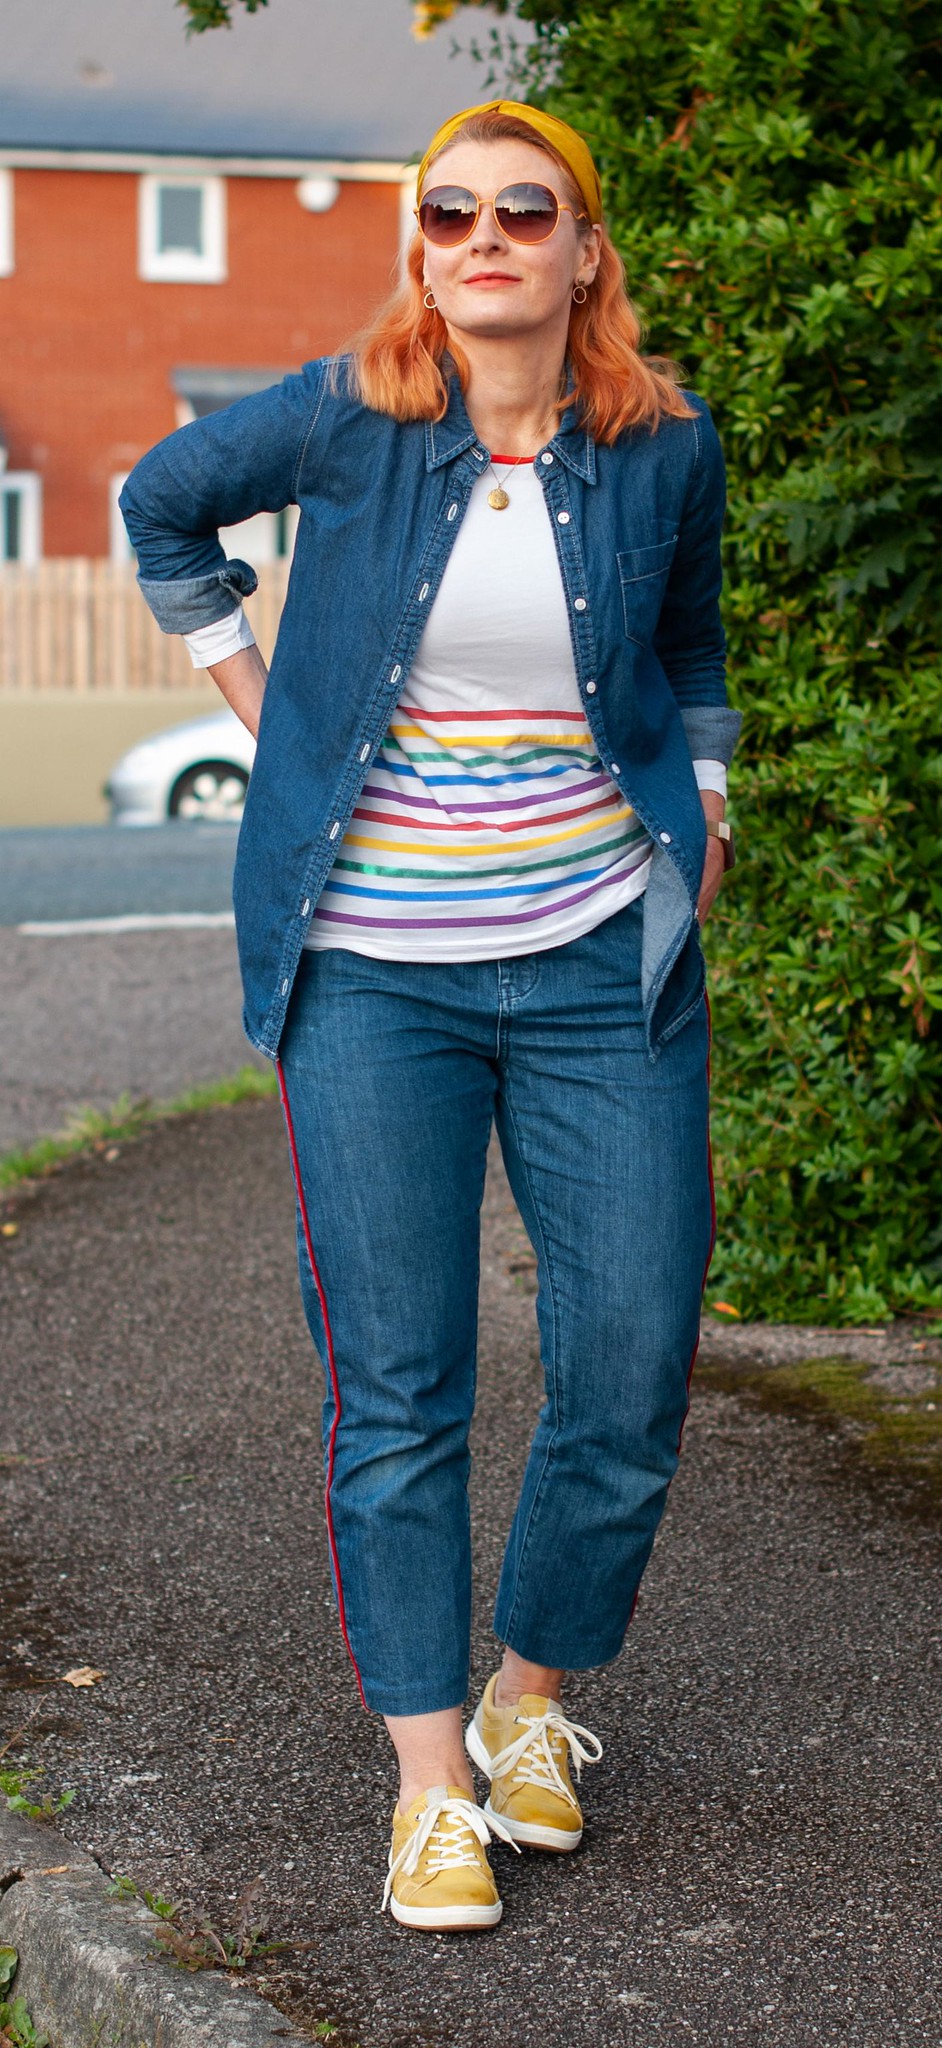 Adding Rainbow Brights to Good Old Double Denim | Not Dressed As Lamb, over 40 style blogger